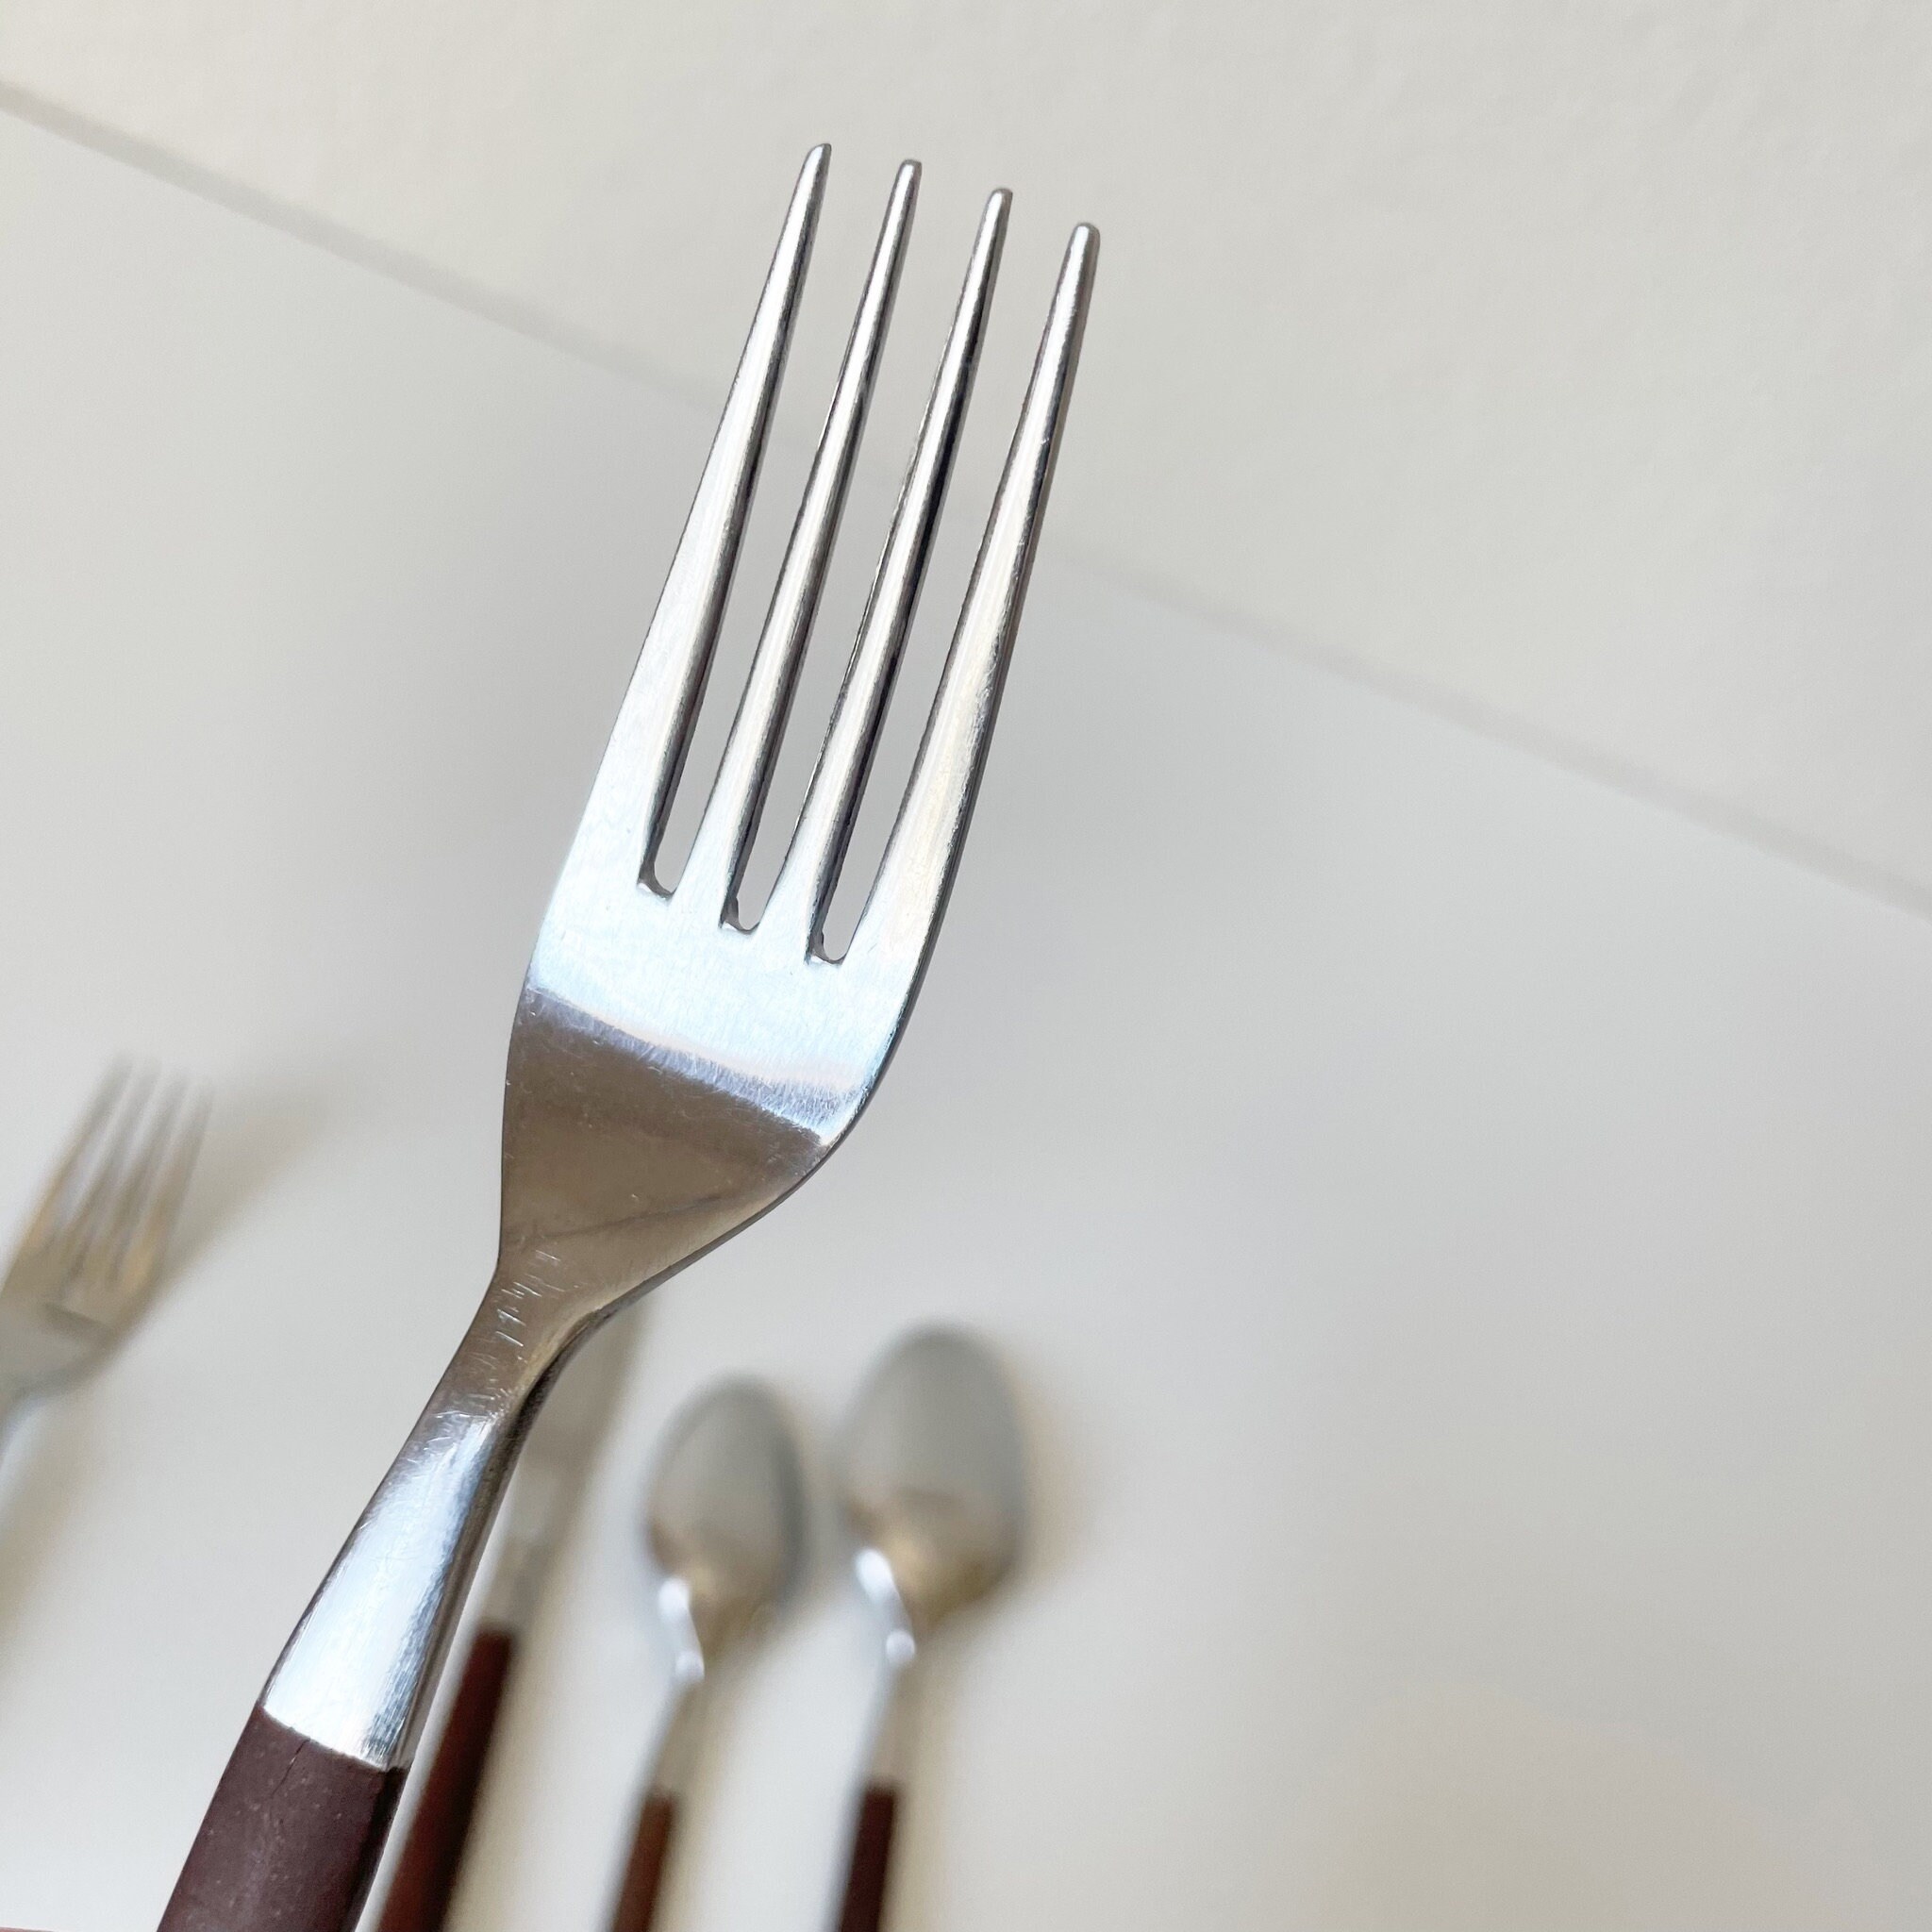 This 5-piece travel cutlery set has to be one of the most stylish ones I've  ever seen - Yanko Design